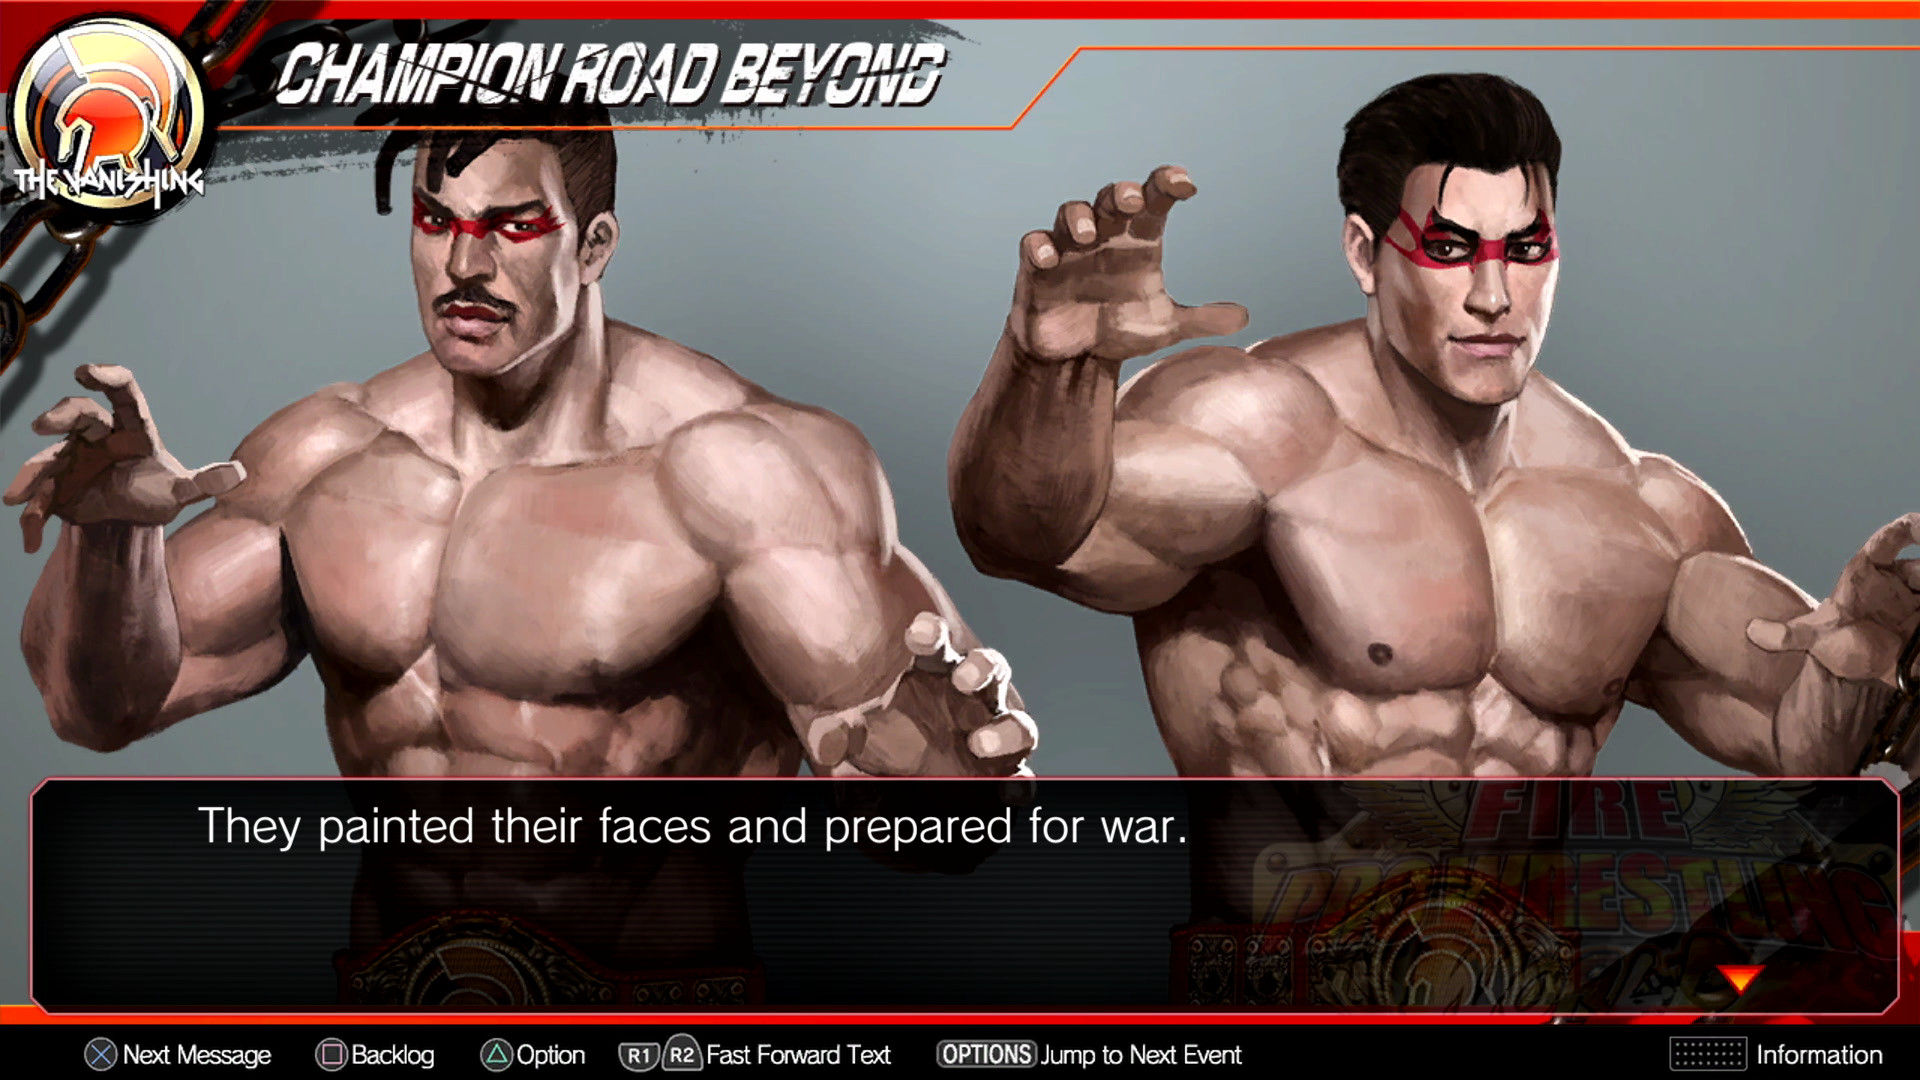 Fire Pro Wrestling World - Fighting Road: Champion Road Beyond Featured Screenshot #1